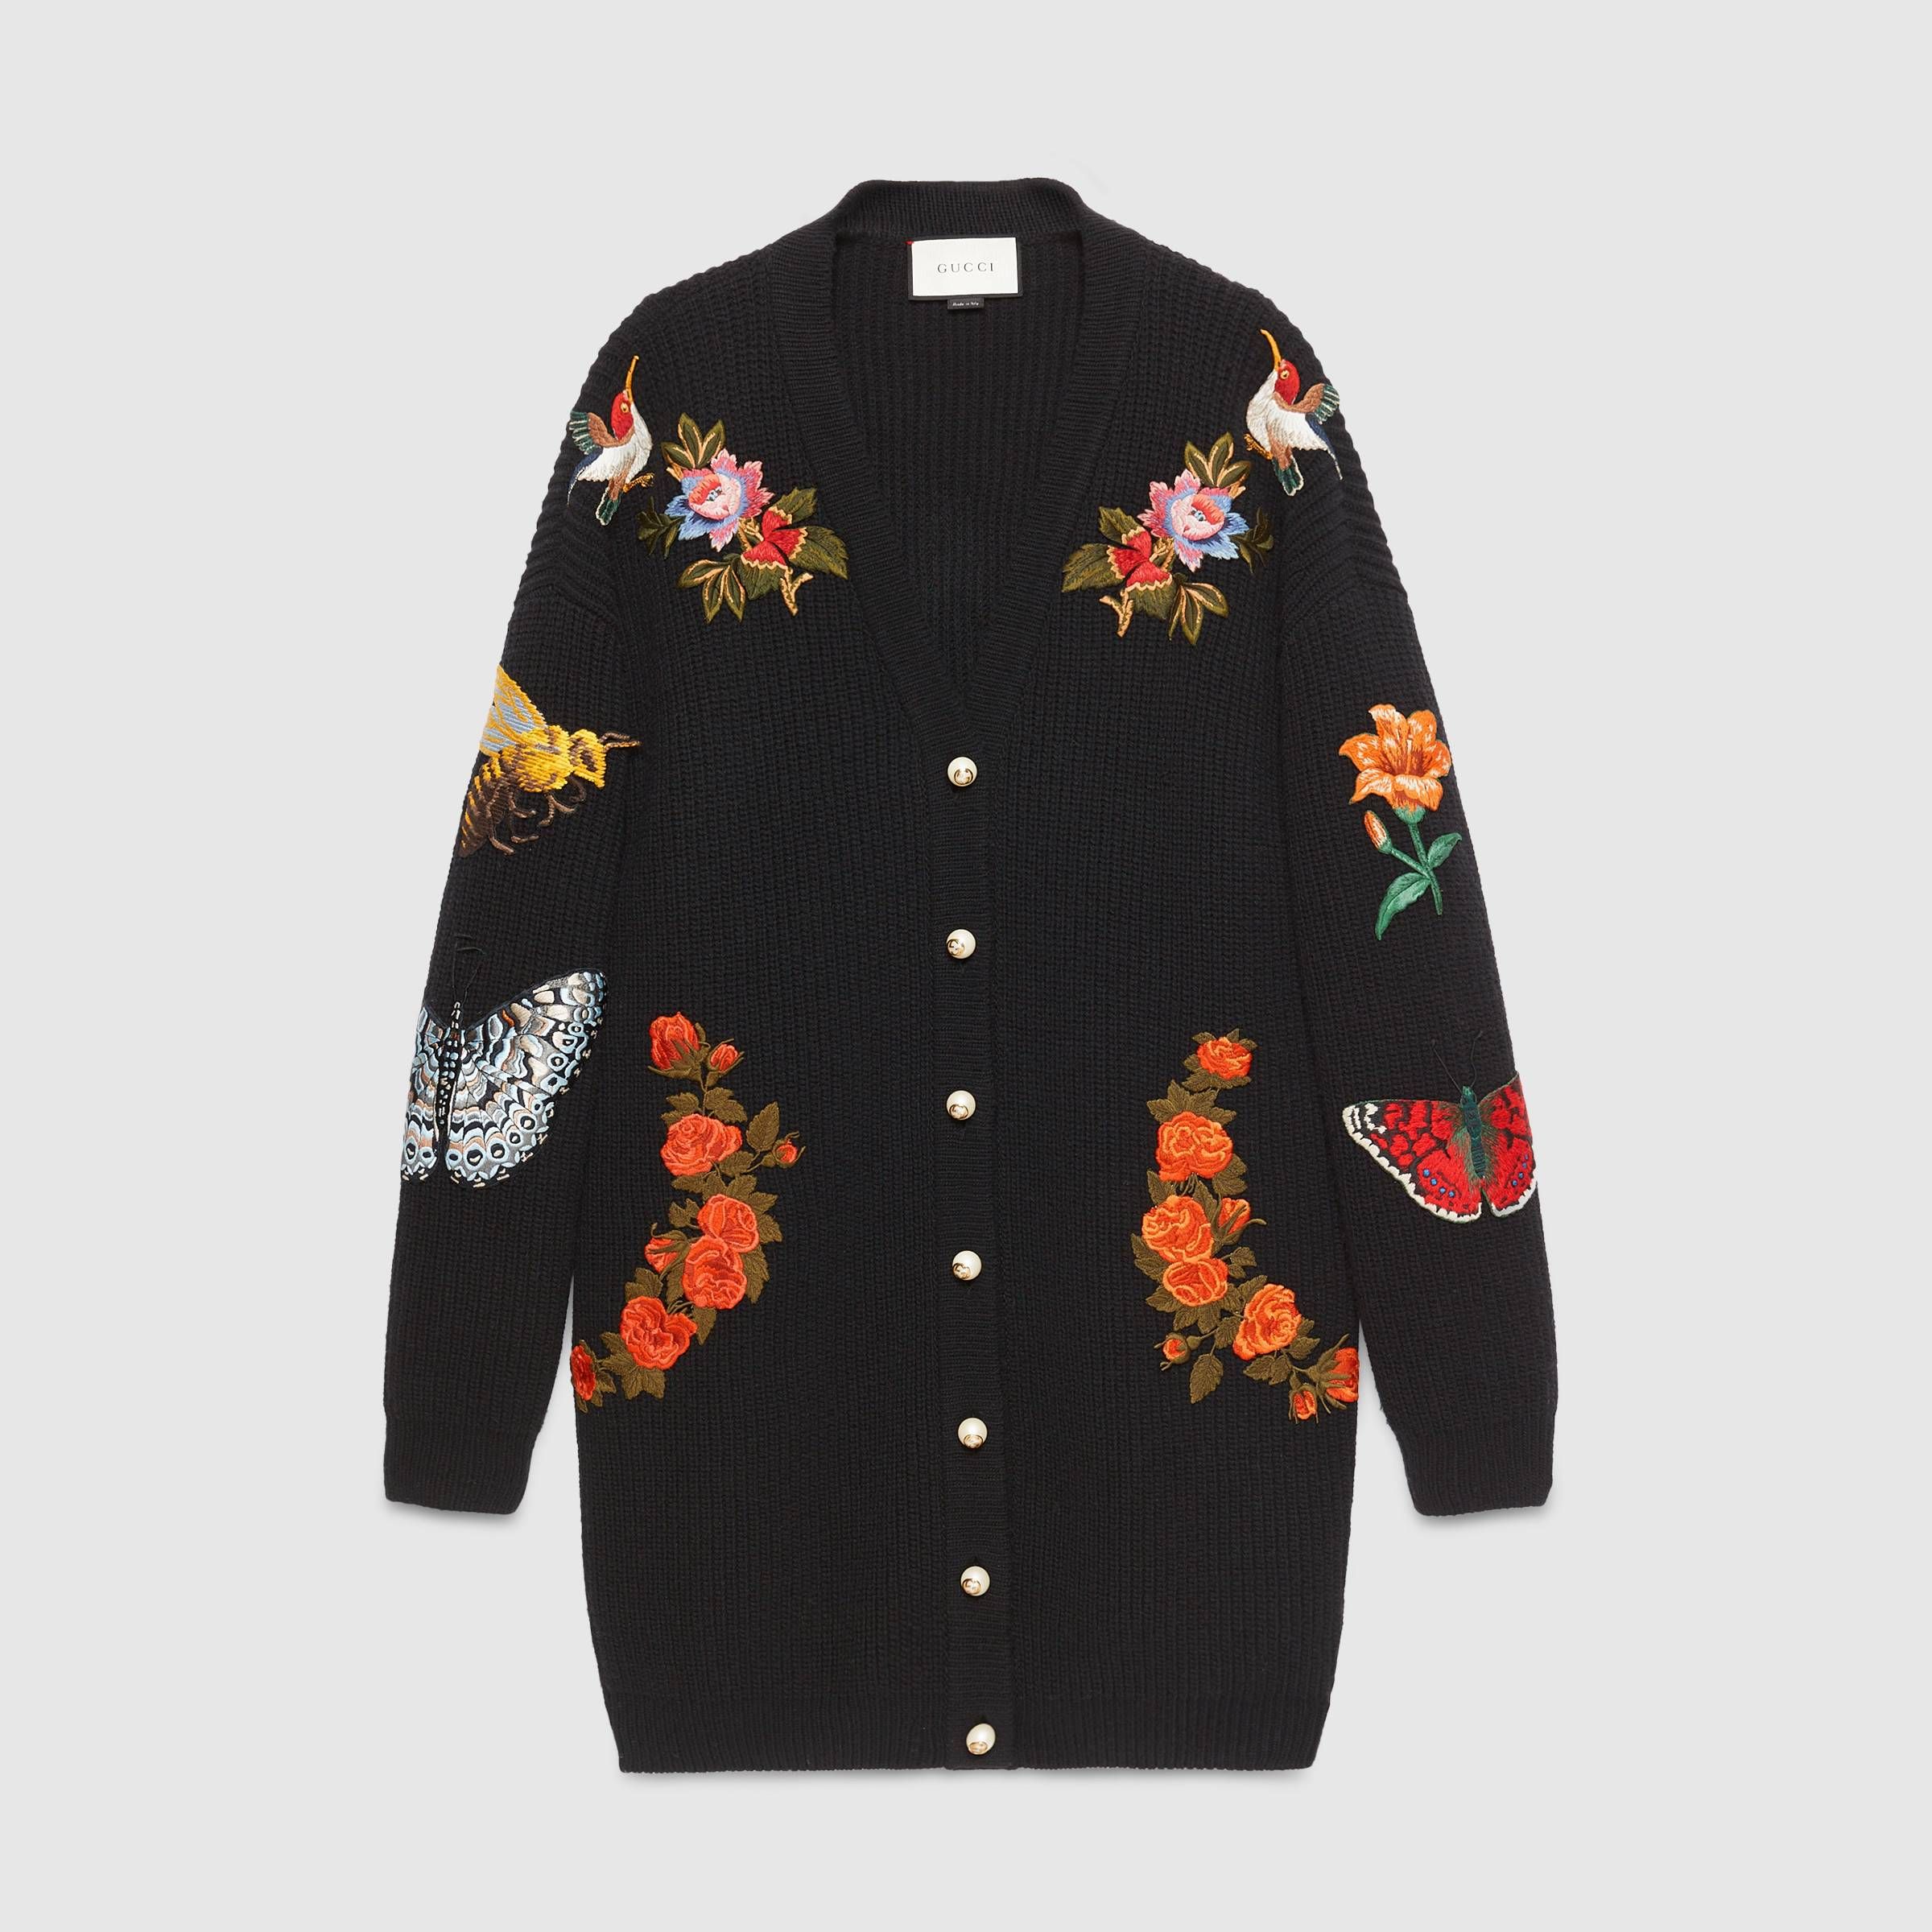 how gucci took back the ‘ugly christmas sweater’ & made you buy it